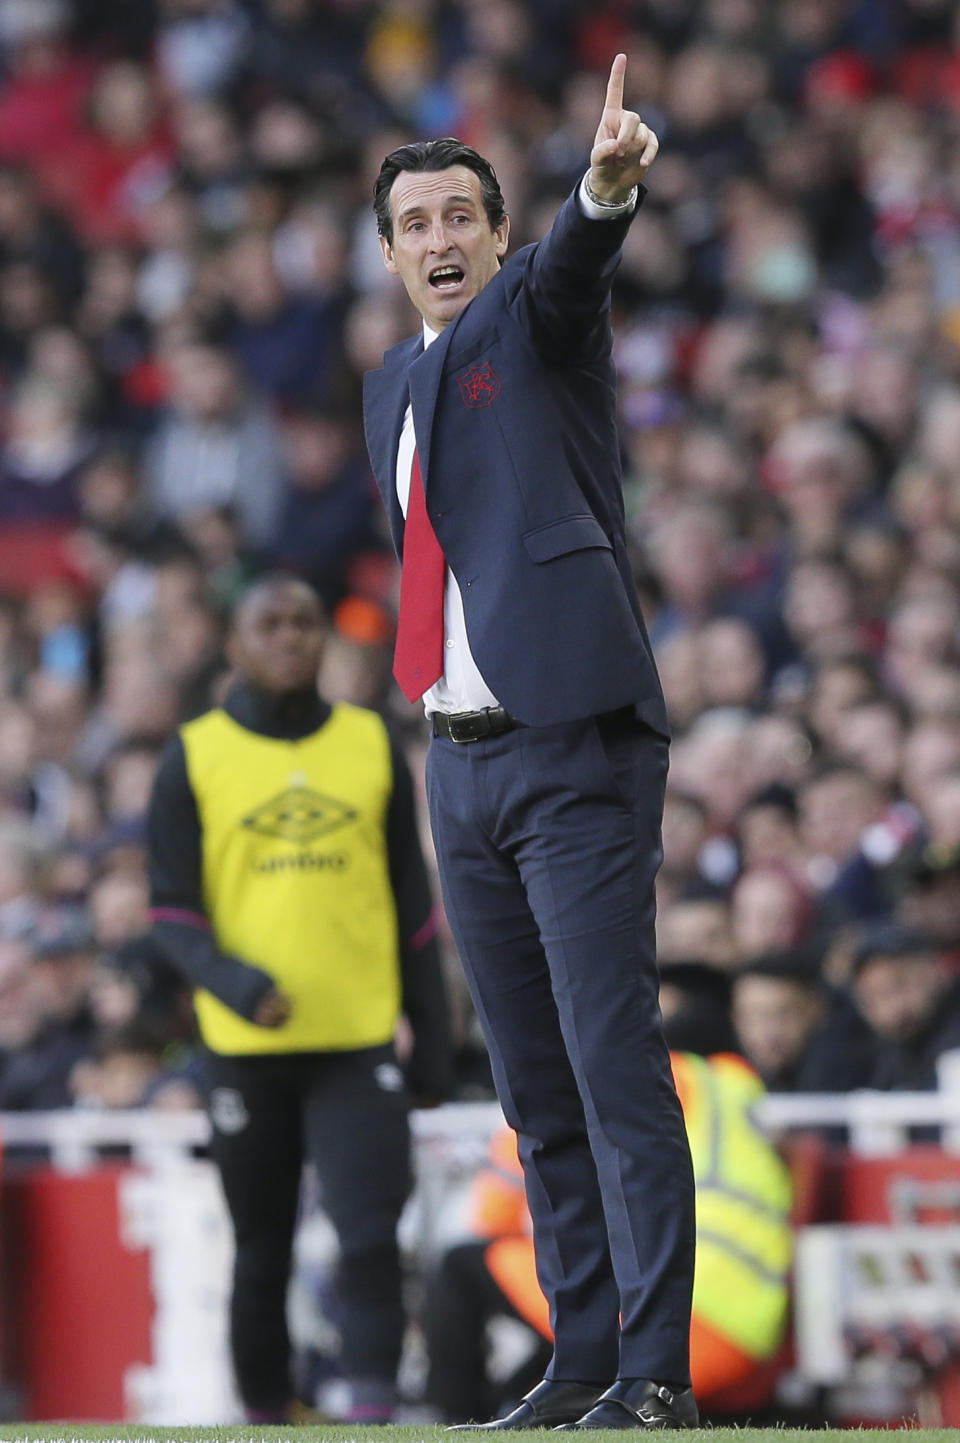 Arsenal's manager Unai Emery points during an English Premier League soccer match between Arsenal and Everton at the Emirates Stadium in London, Sunday Sept. 23, 2018. (AP Photo/Tim Ireland)